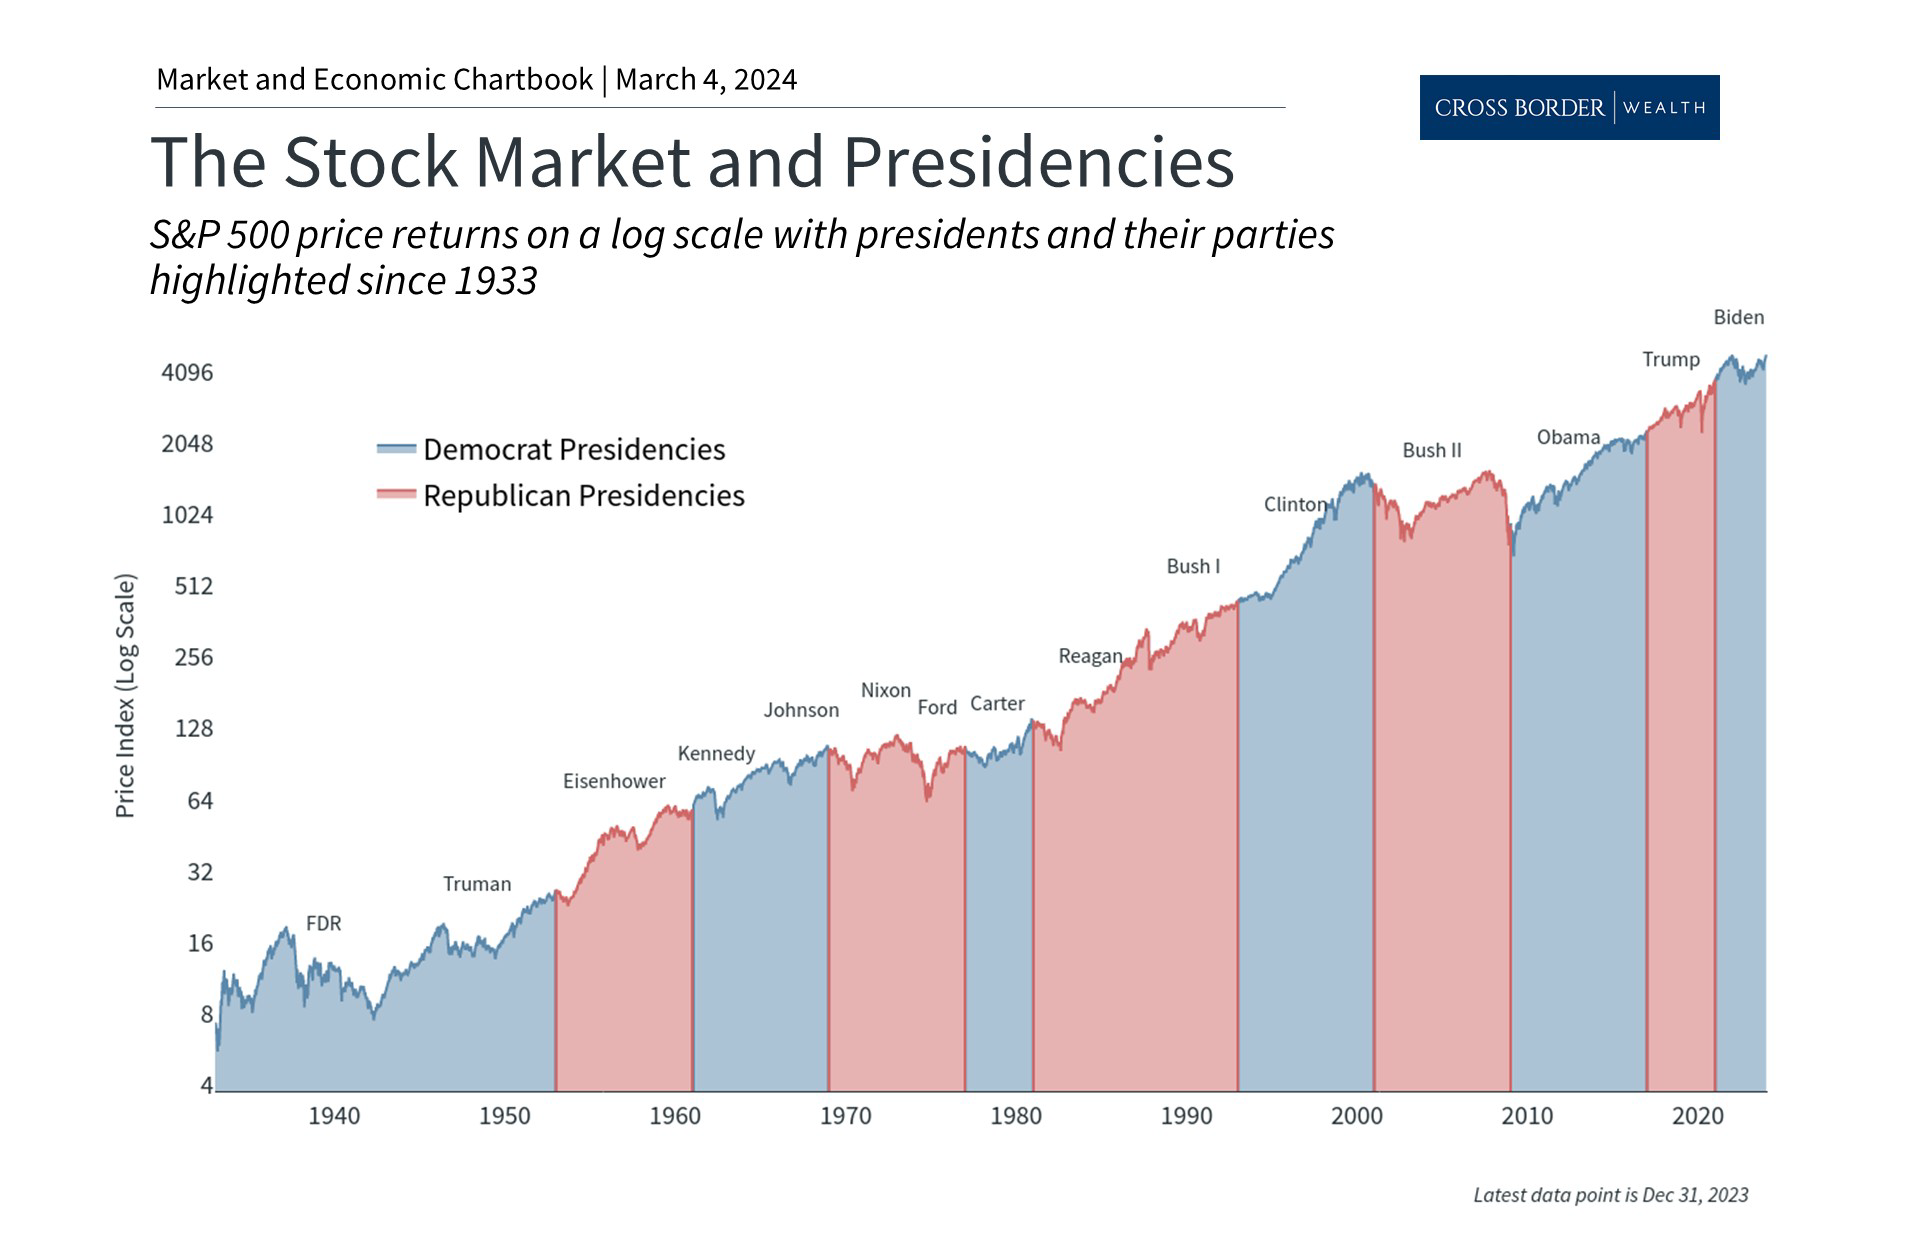 How Presidential Elections Affect the Stock Market